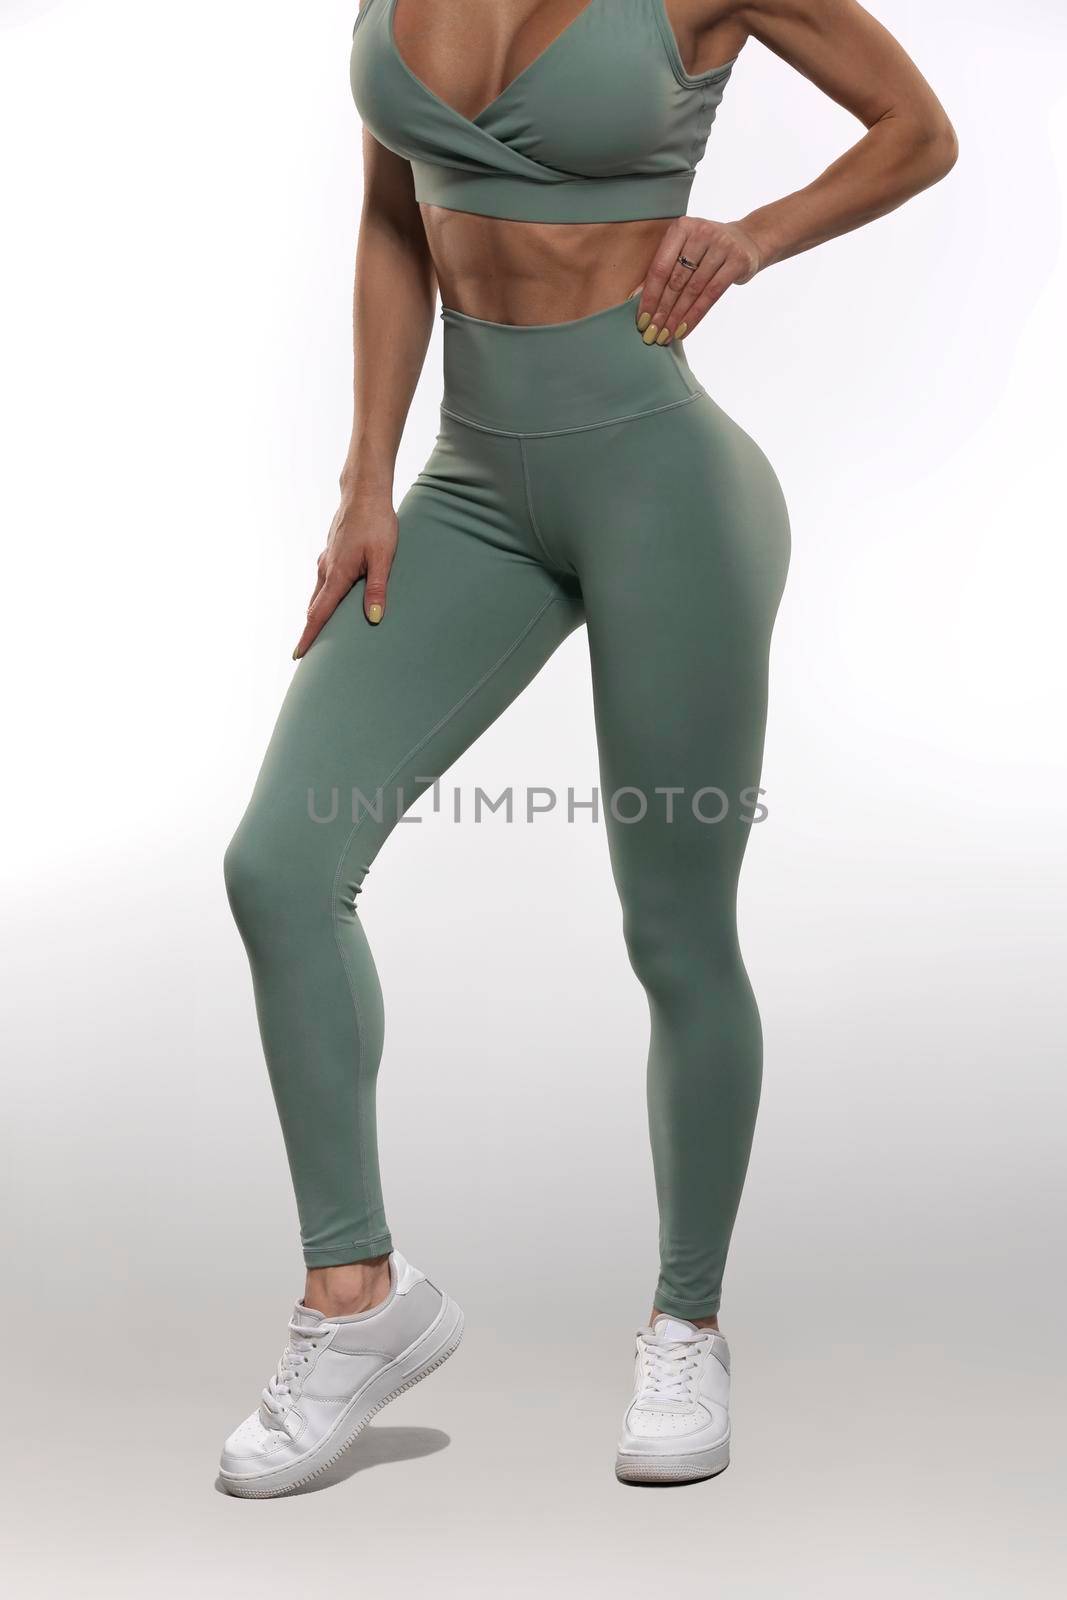 legs girl in olive leggings and top on a white background by but_photo